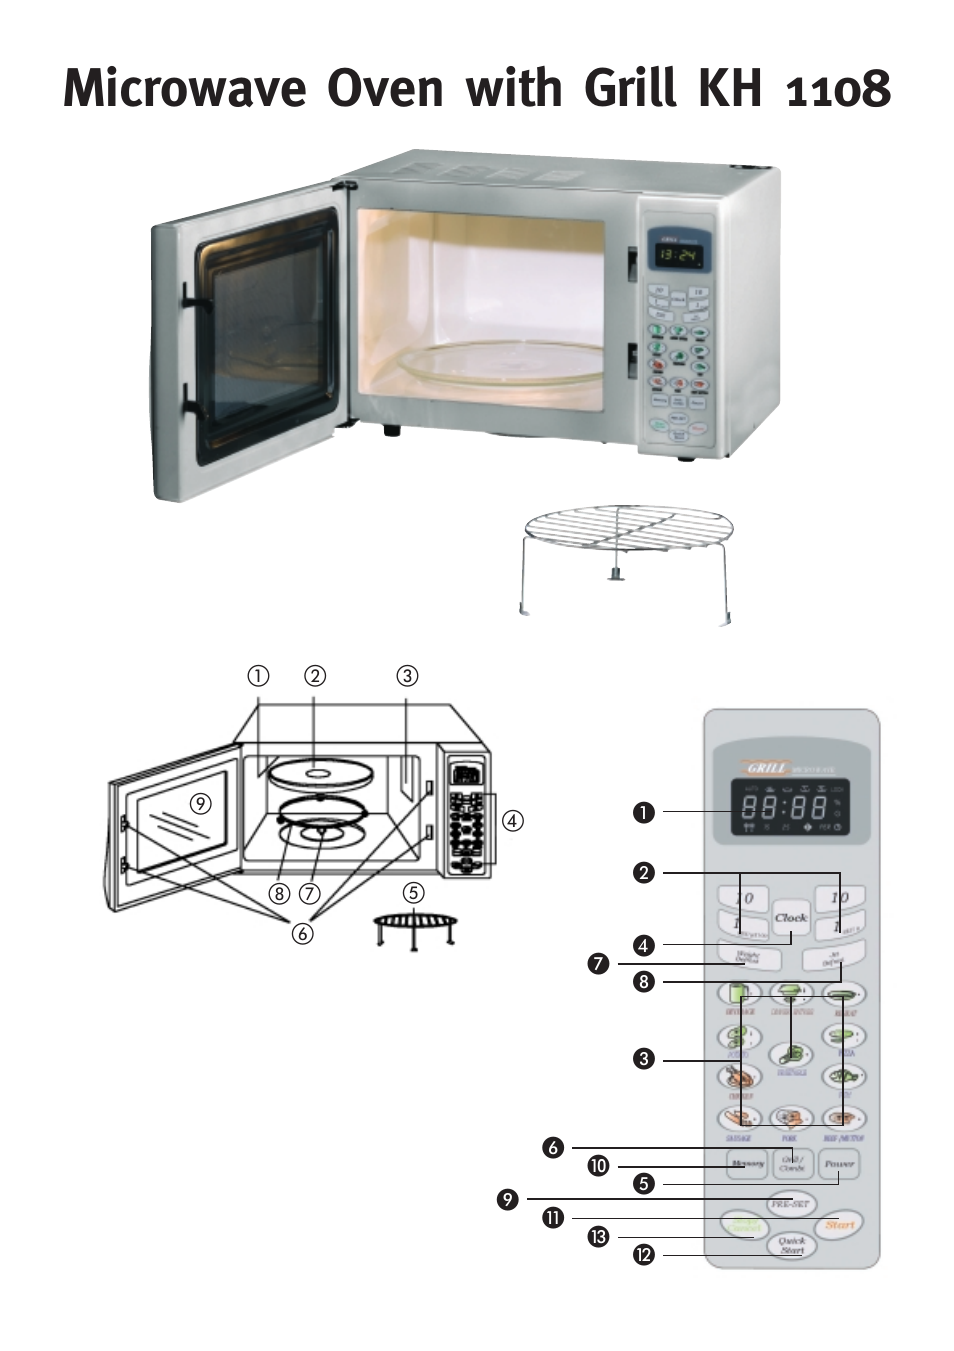 Microwave oven with grill kh 1108 | Bifinett KH 1108 User Manual | Page